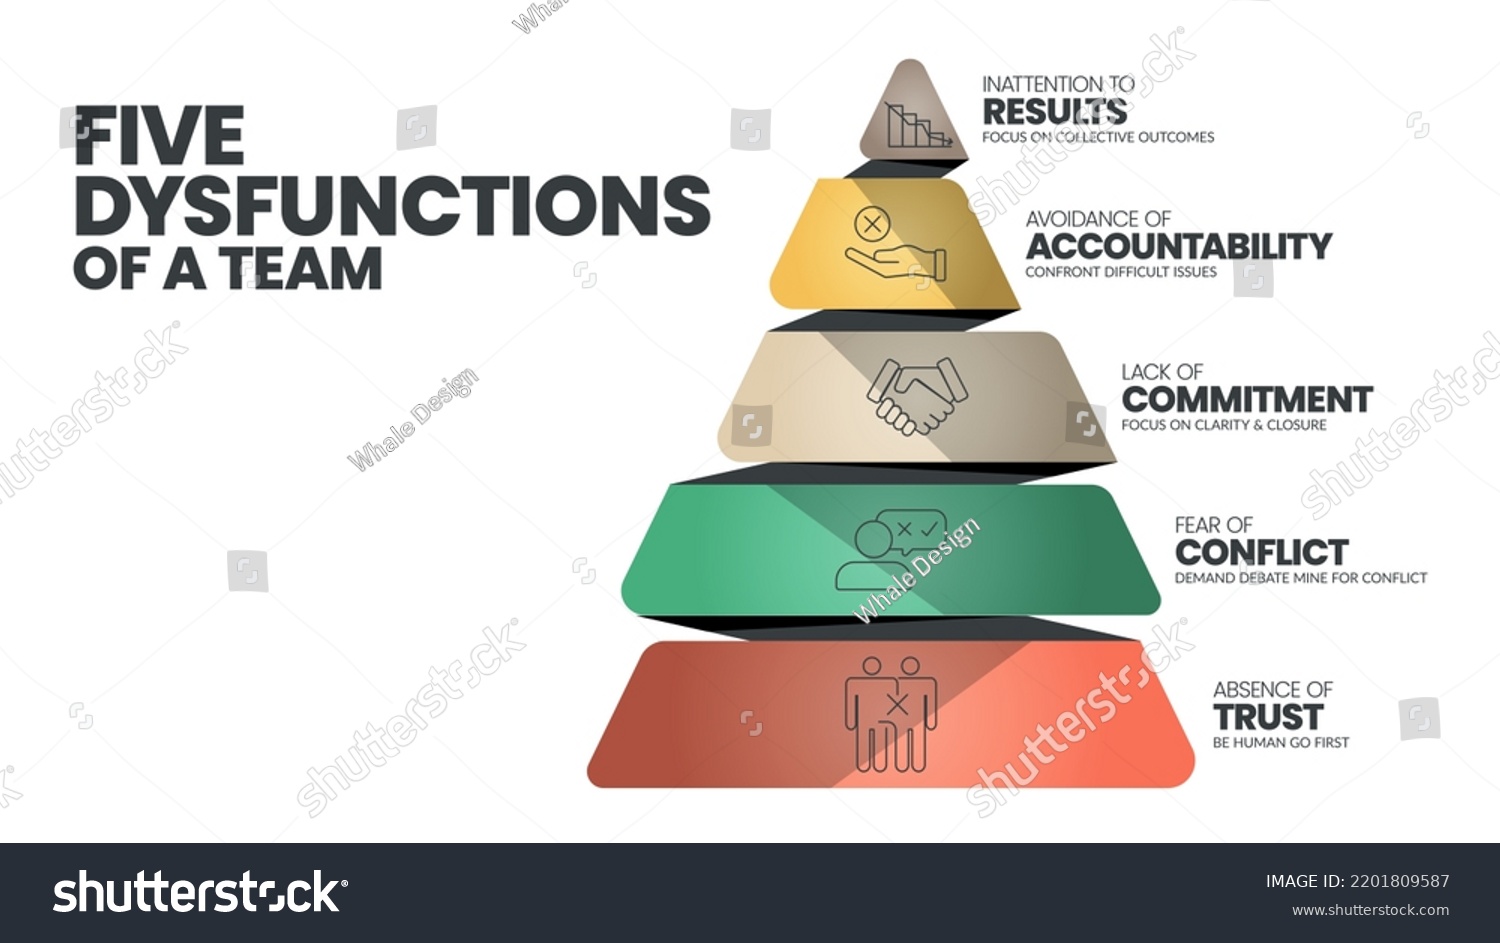 SVG of 5 Dysfunctions of a Team infographic template vector has 5 level to analyse such as Inattention to Results, Avoidance of Accountability, Lack of Commitment, Fear of Conflict and Absence of Trust. svg